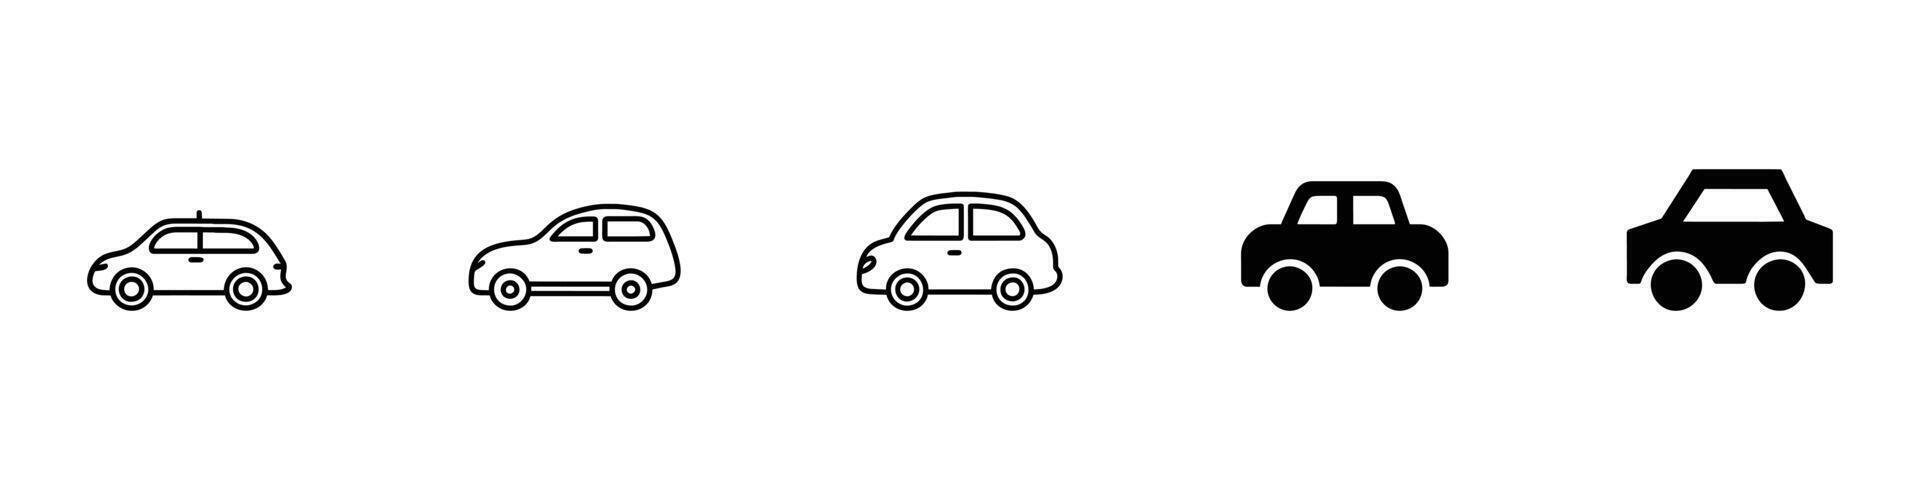 car icon isolated white background vector